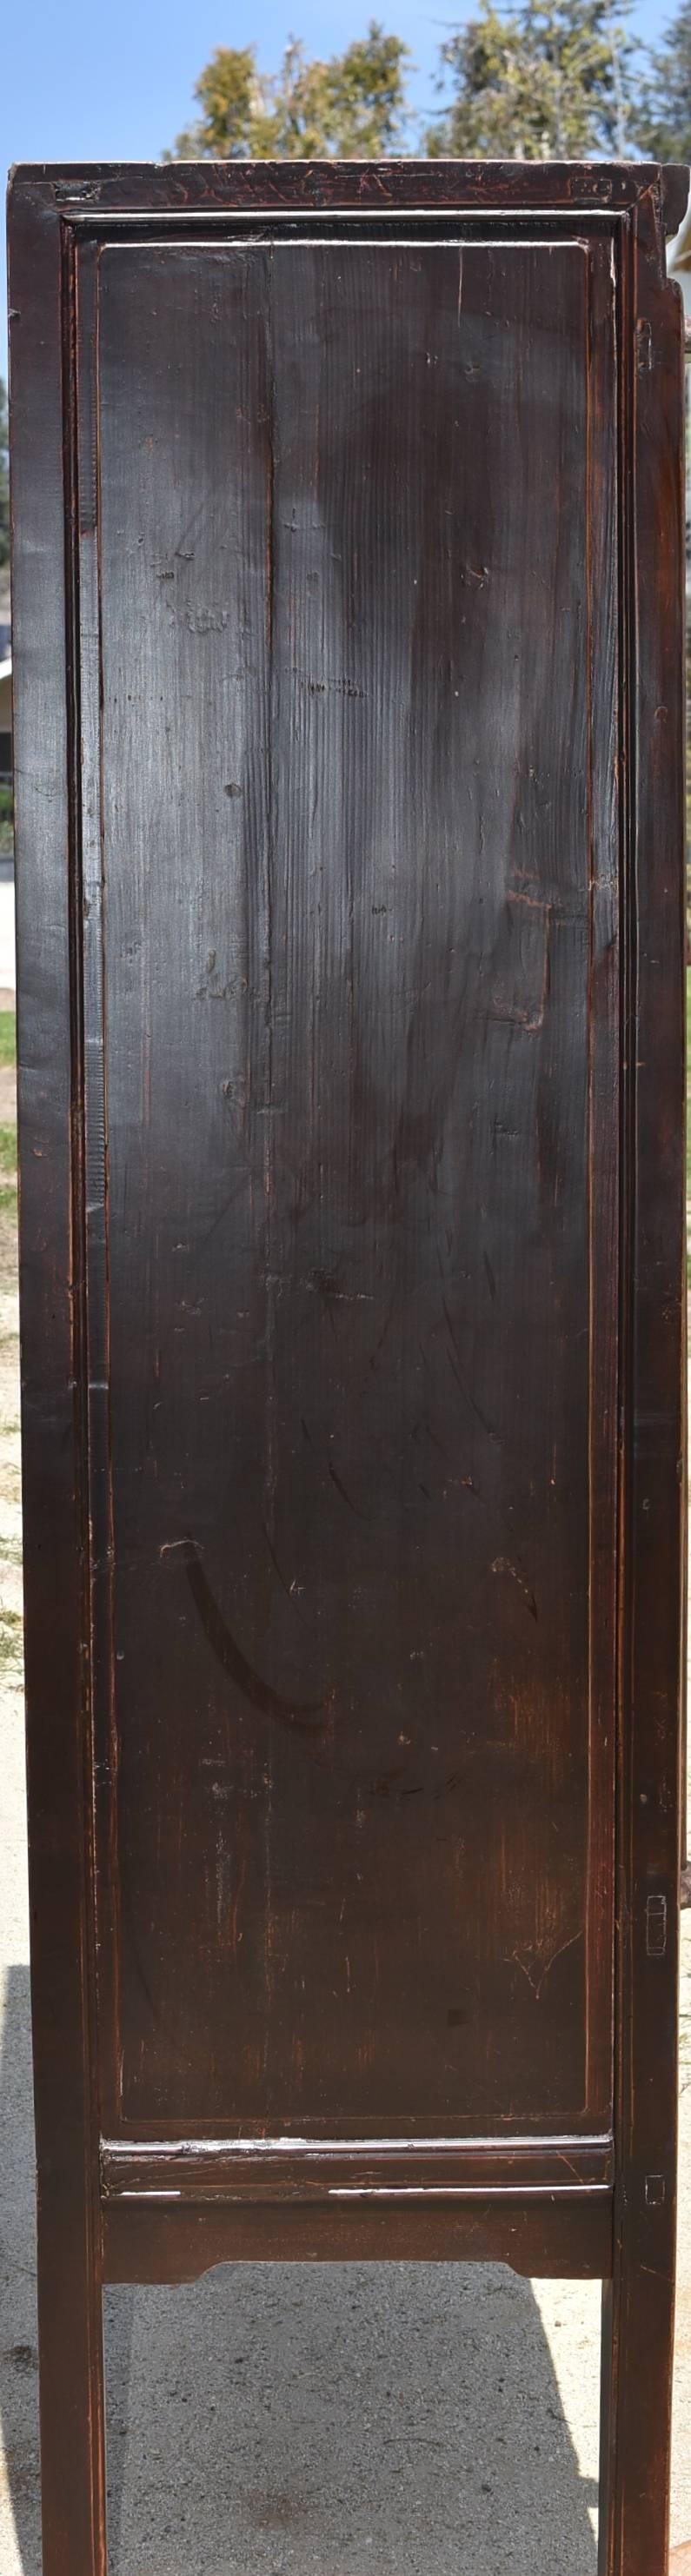 Large Burl Wood Armoire, Brown and Gold Burl Wood Cabinet 8